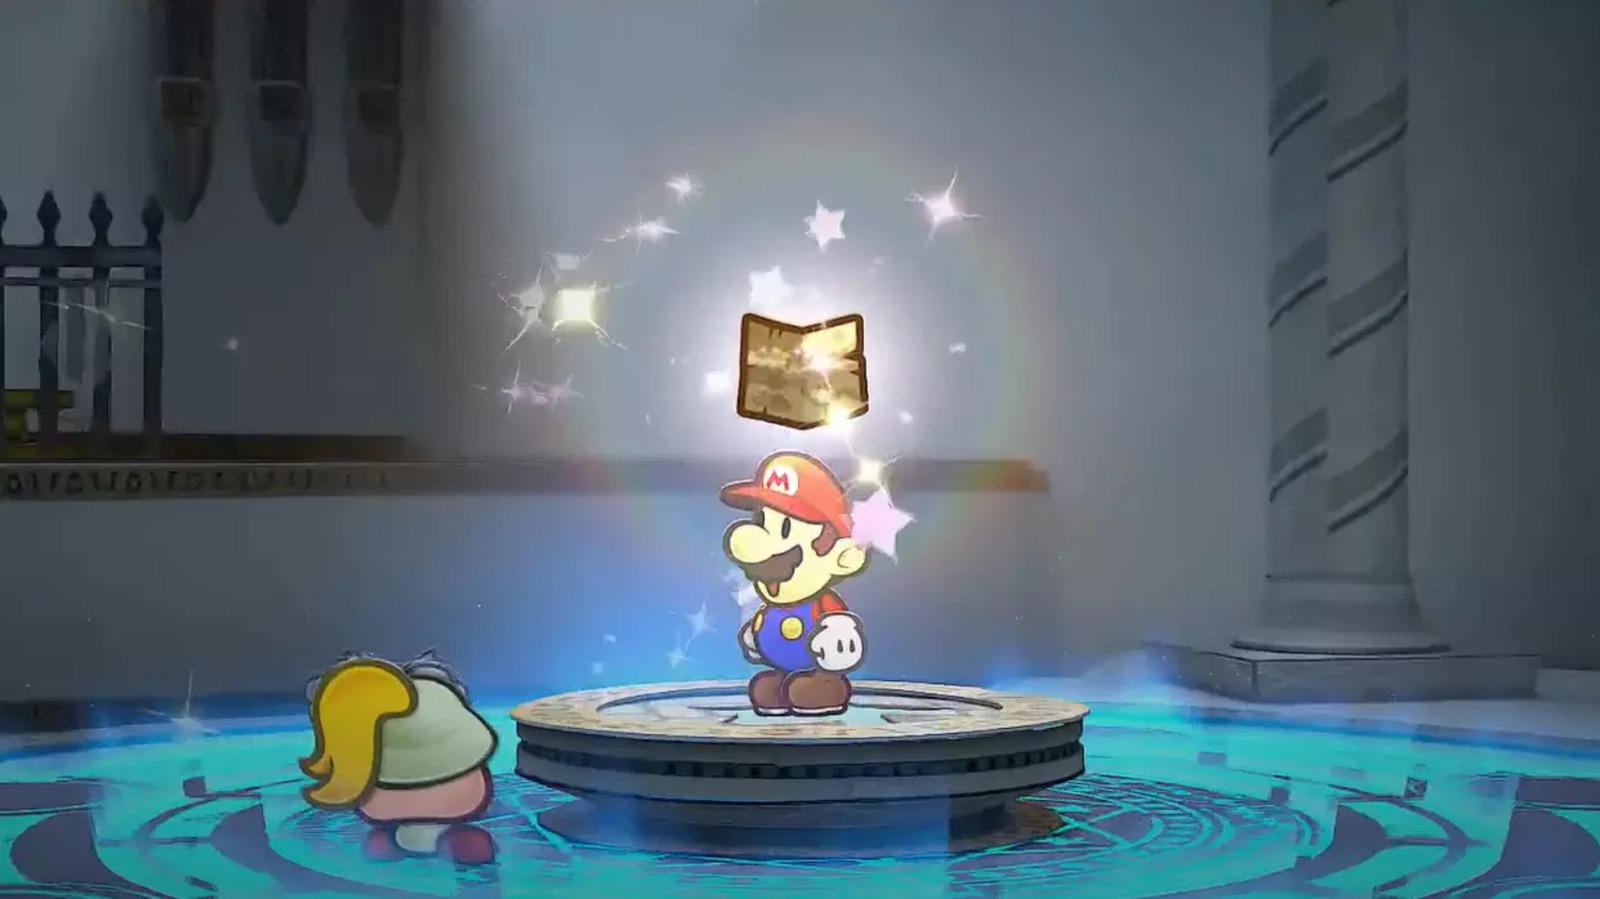 Paper Mario: The Thousand-Year Door' Release Window, Trailer, and